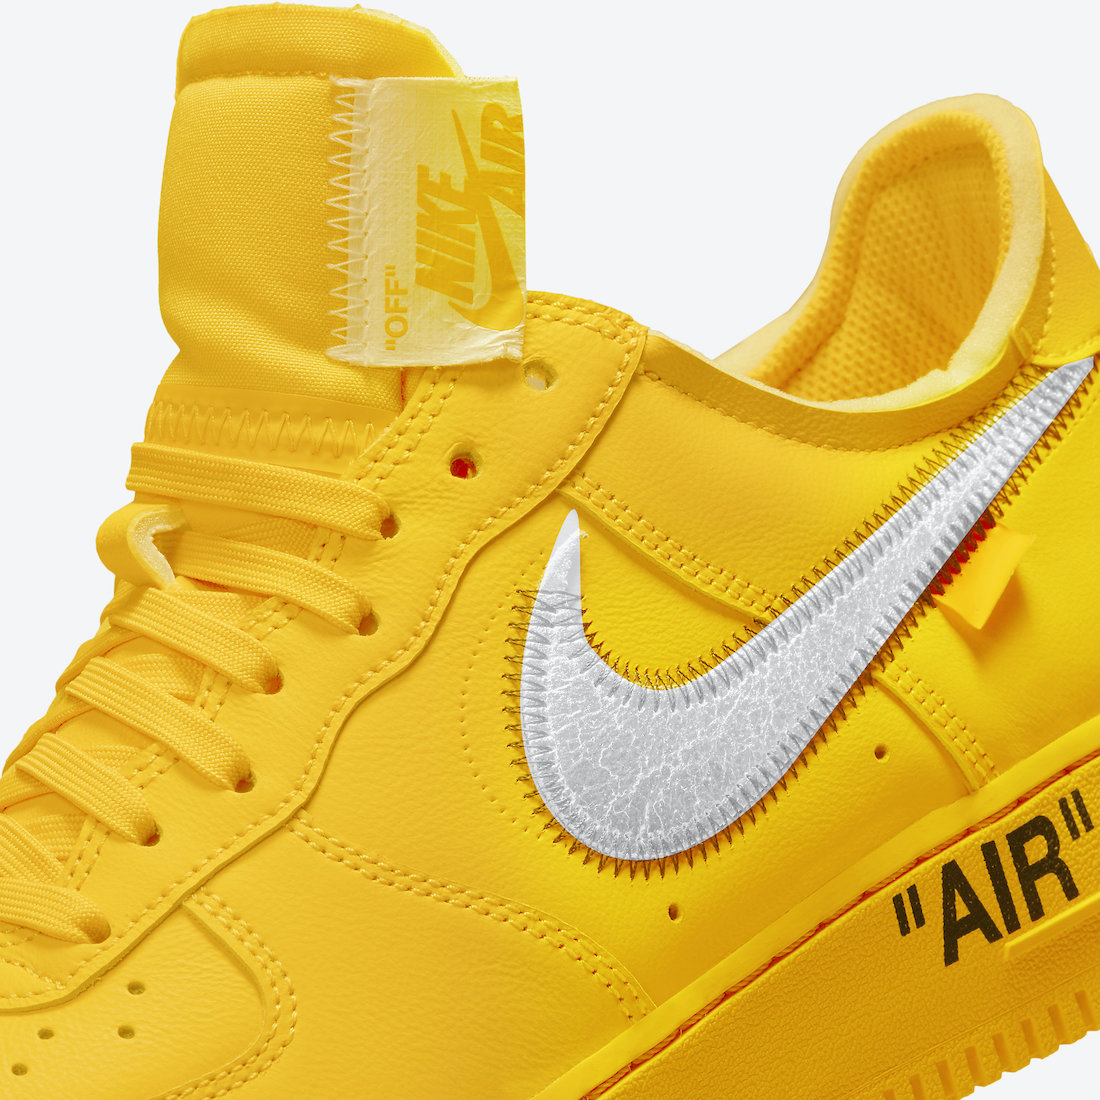 Off-White Nike Air Force 1 Low University Gold DD1876-700 Release Date